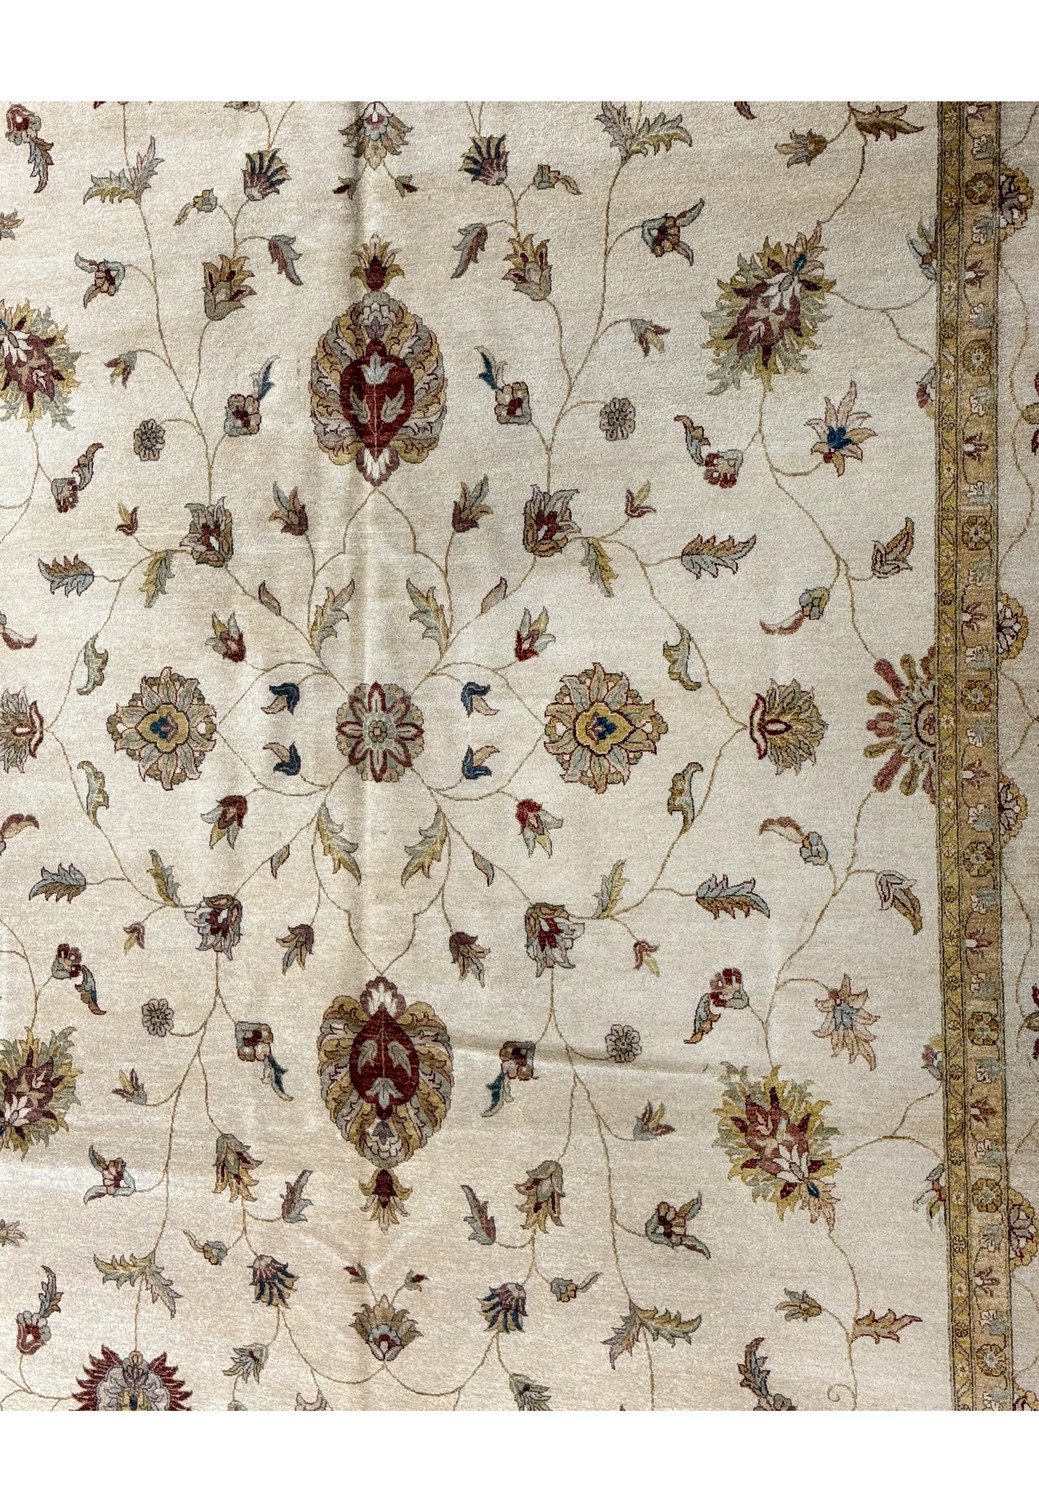 Close-up of the central pattern work showcasing the precision of craftsmanship.